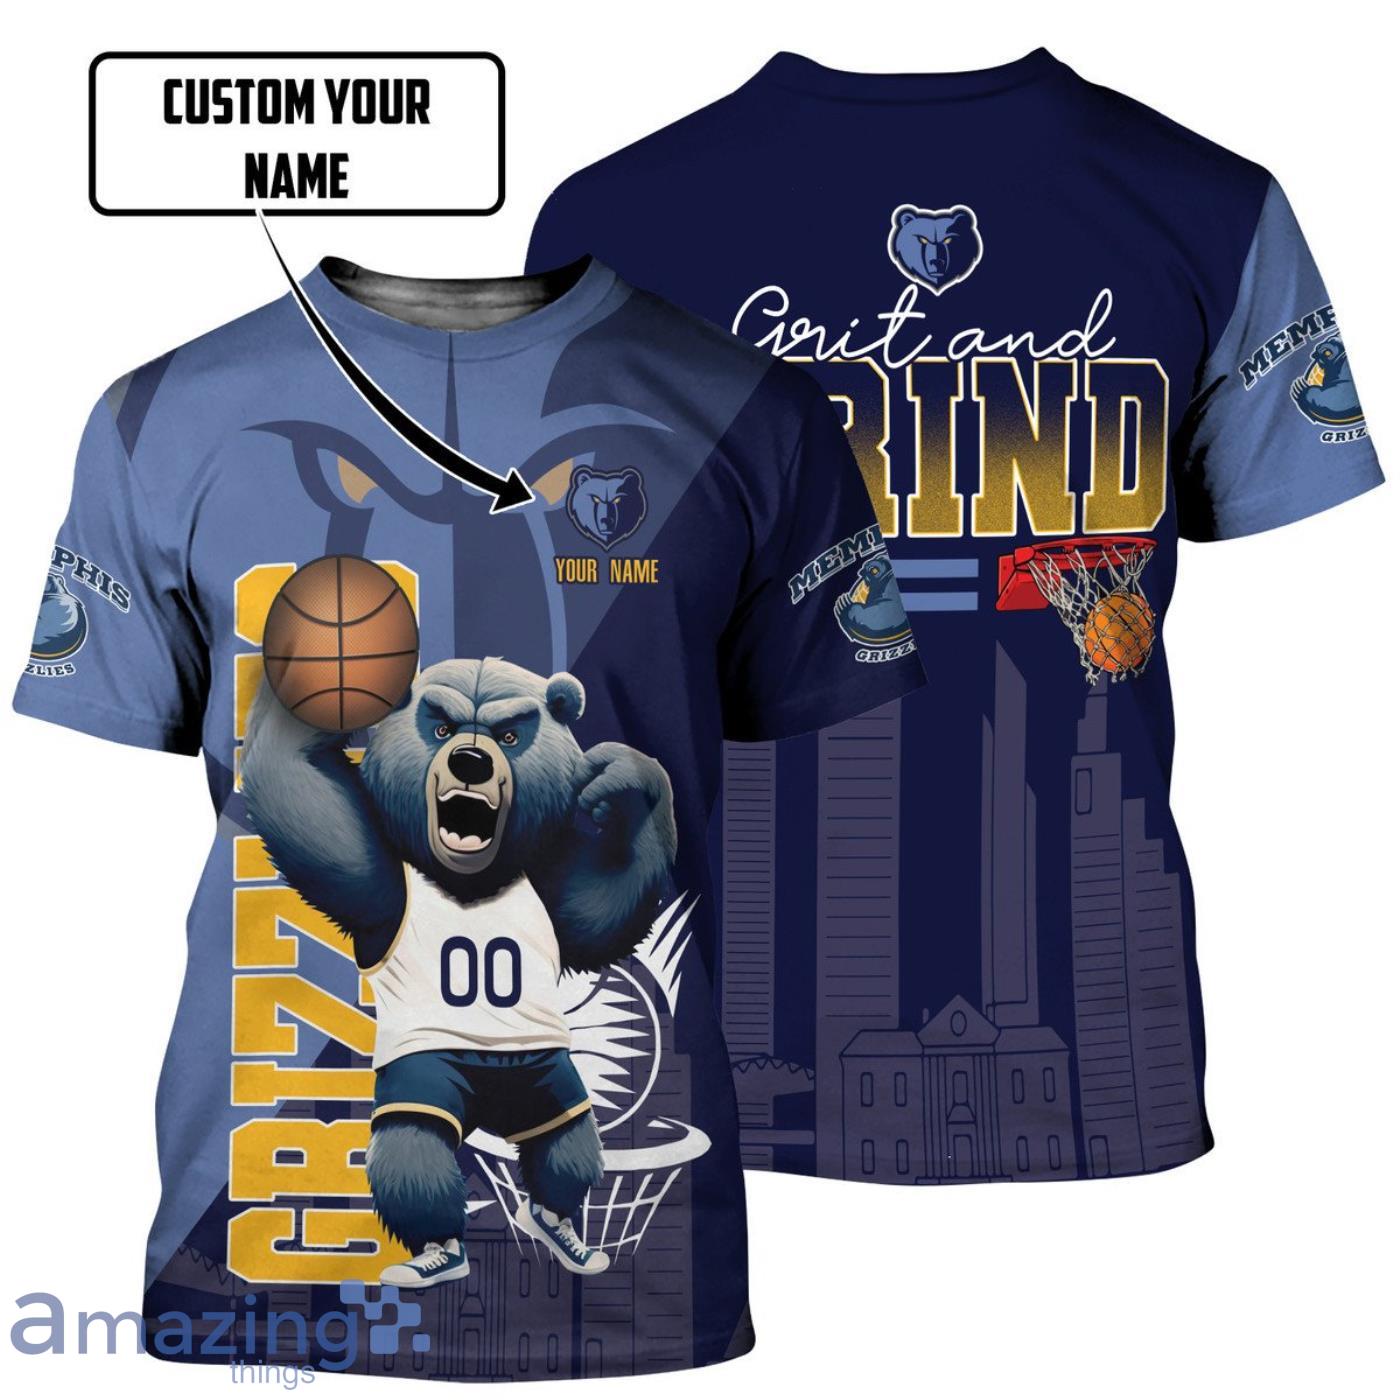 Memphis Grizzlies Retro Basketball Jersey Personalised Name 